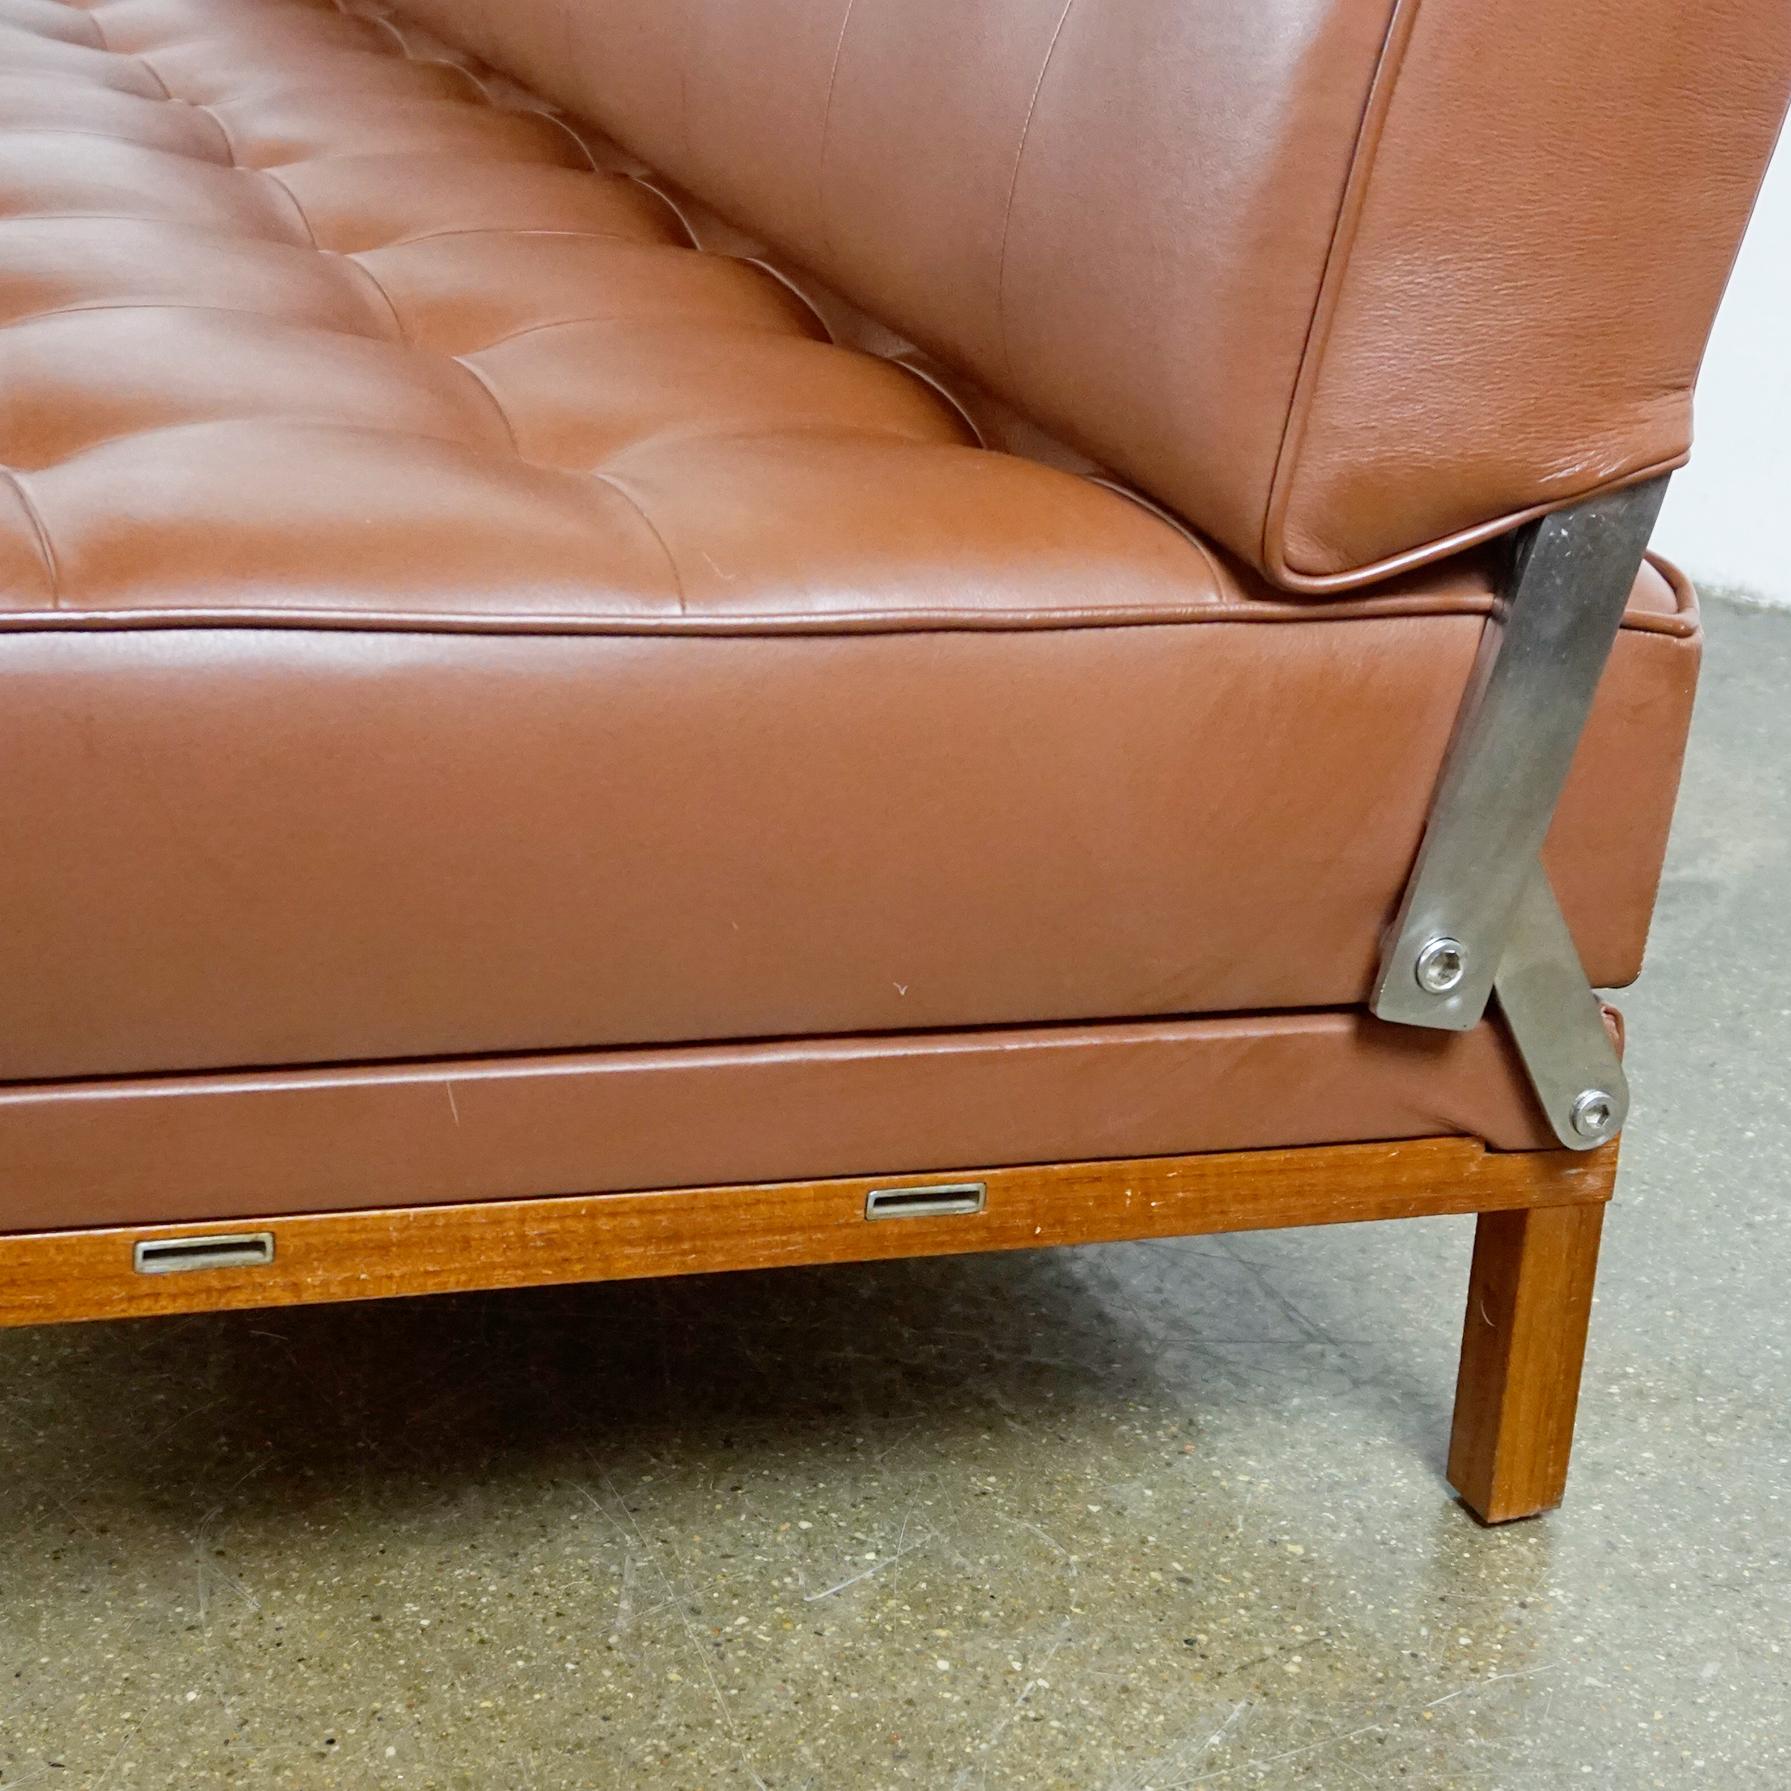 Mid-Century Modern Cognac Leather Sofa or Daybed by Johannes Spalt for Wittmann 5